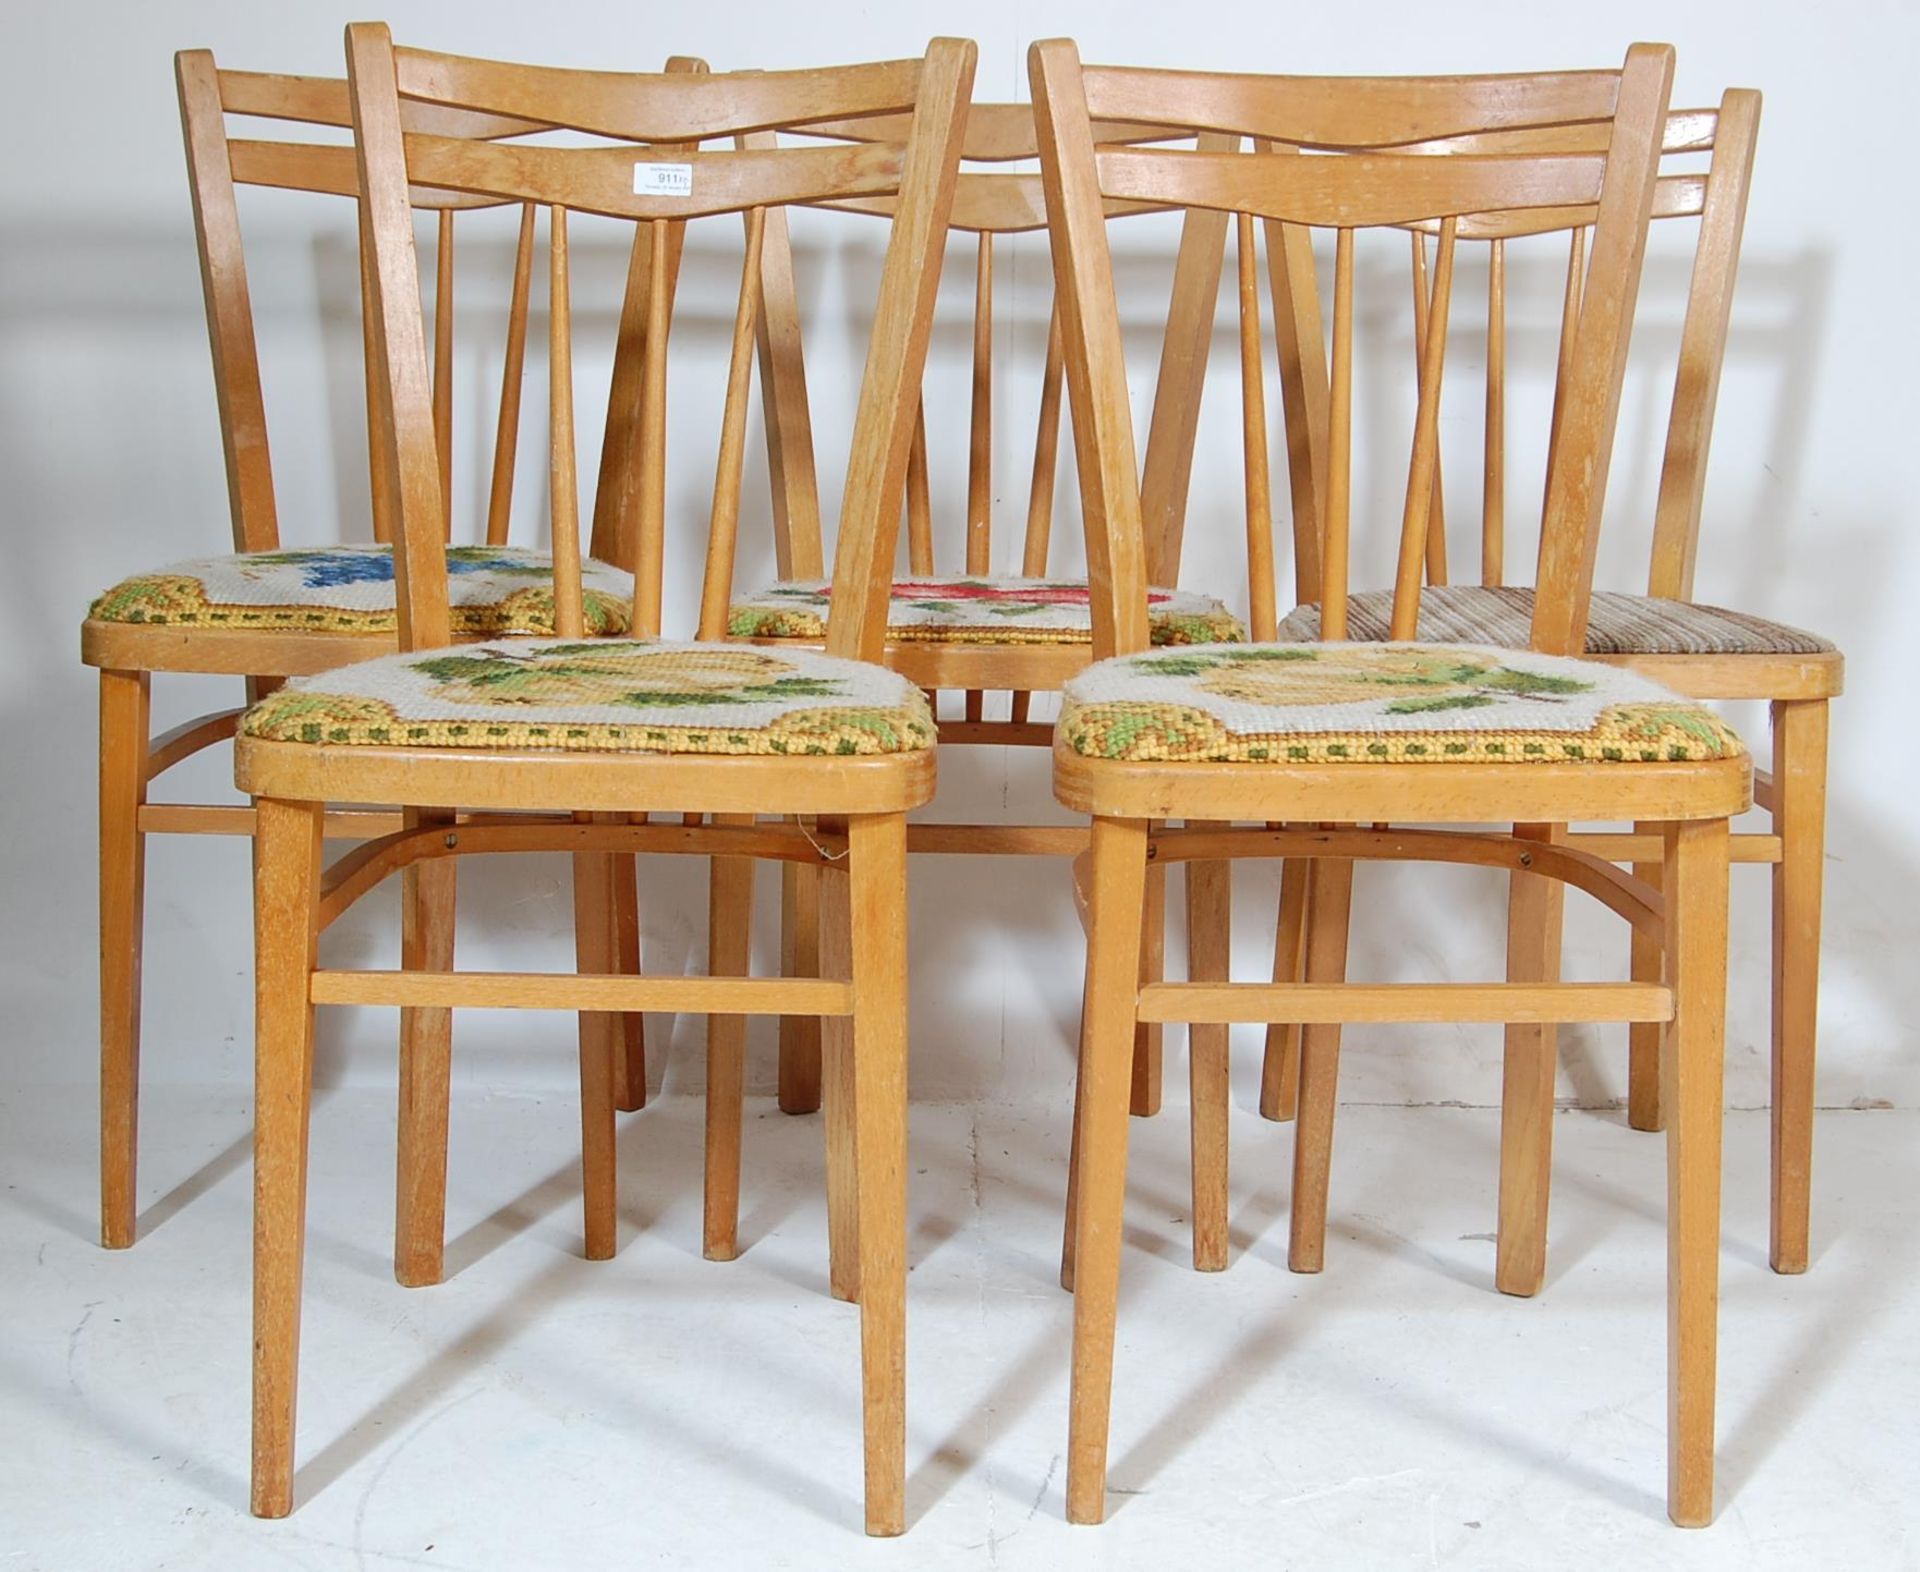 FIVE RETRO 20TH CENTURY DINING CHAIRS / KITCHEN CHAIRS